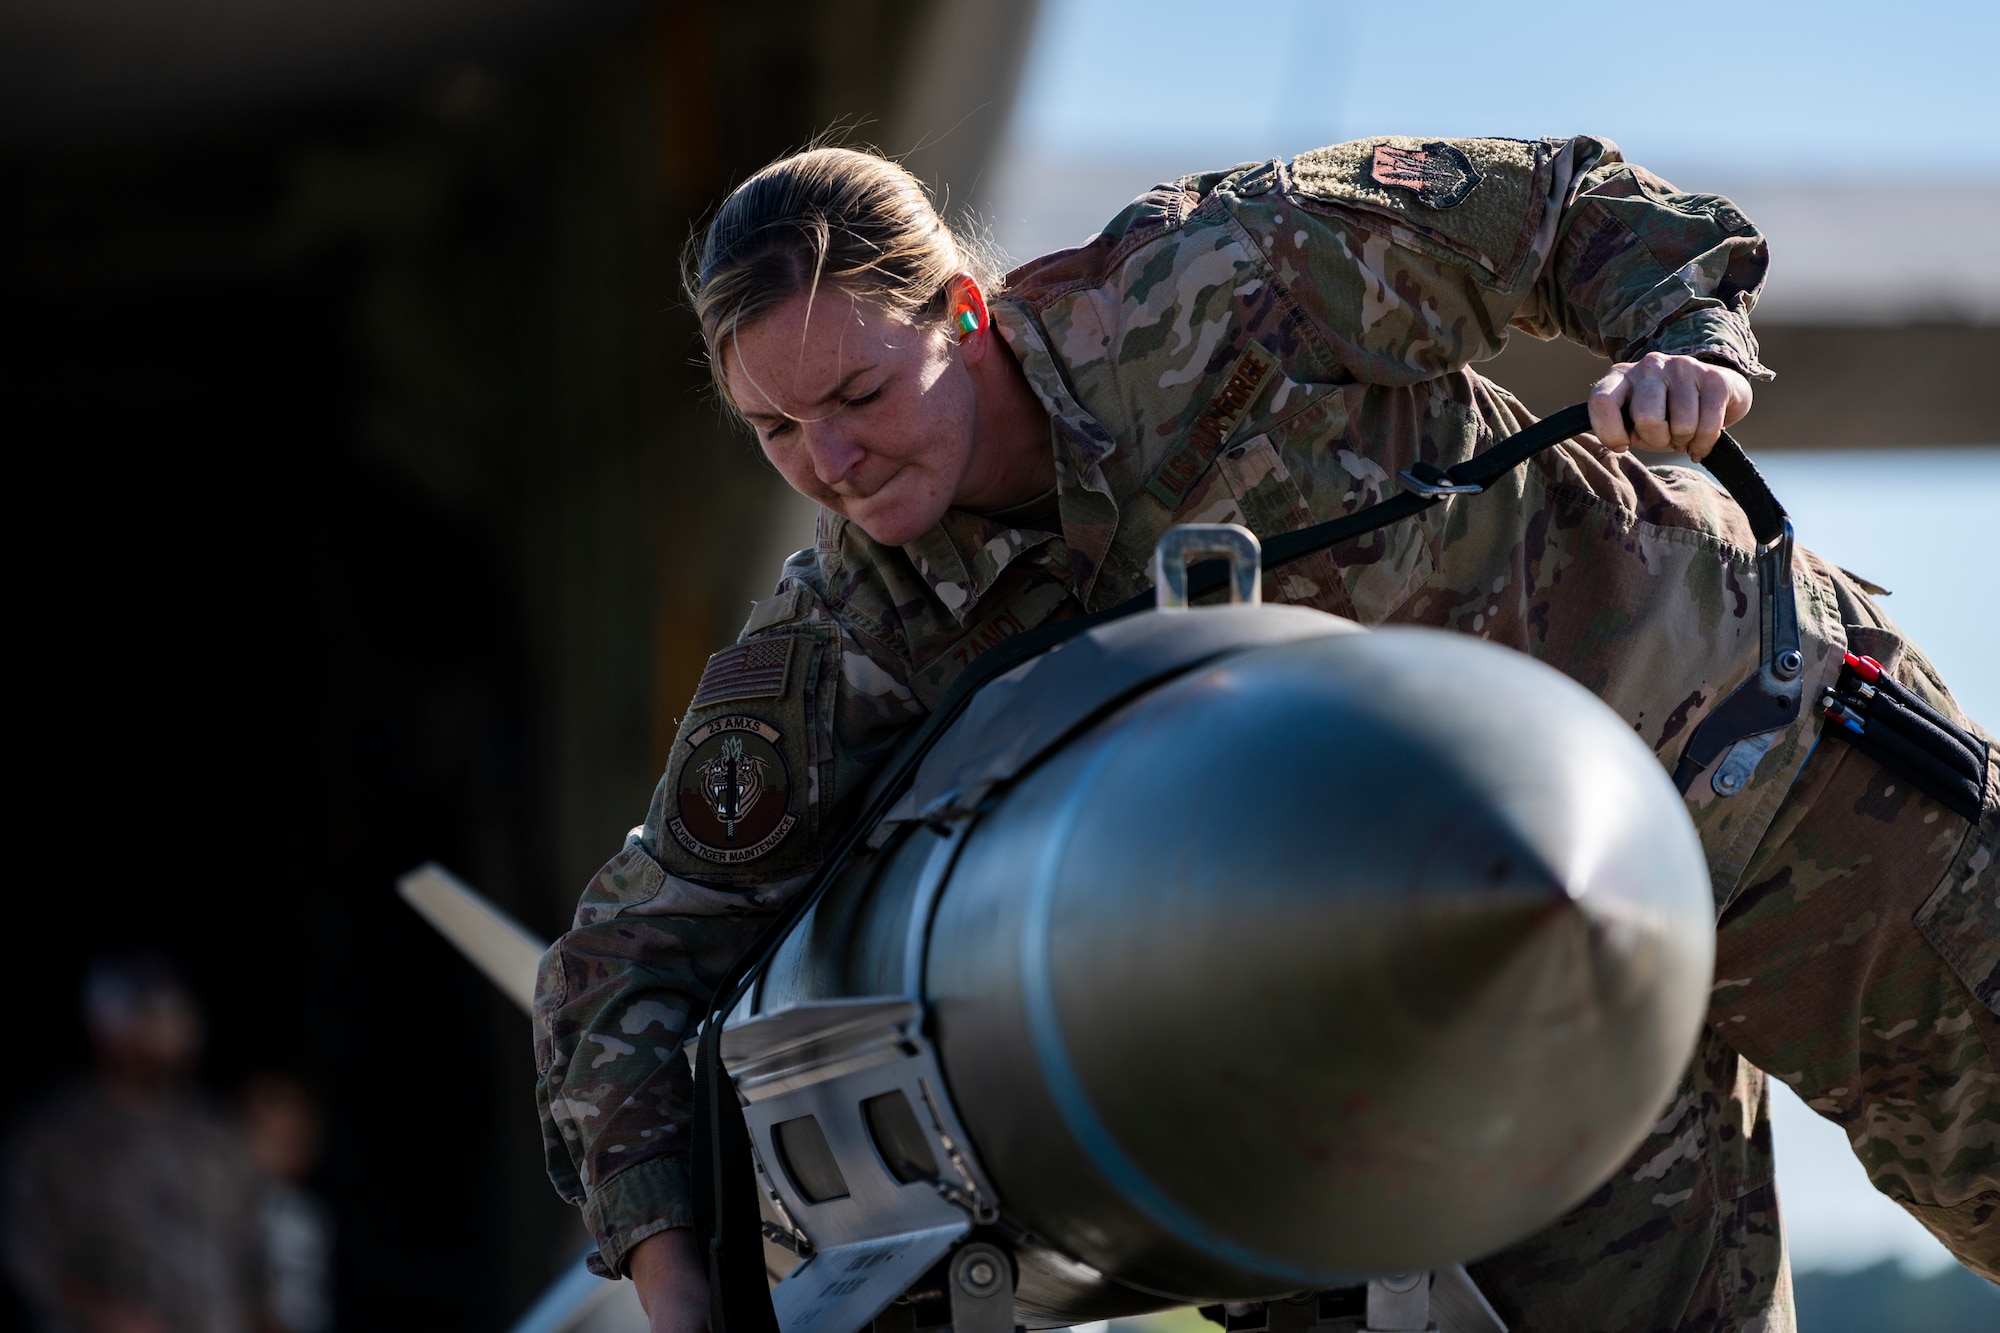 Weapons load crew chief, conducts a weapons-load demonstration